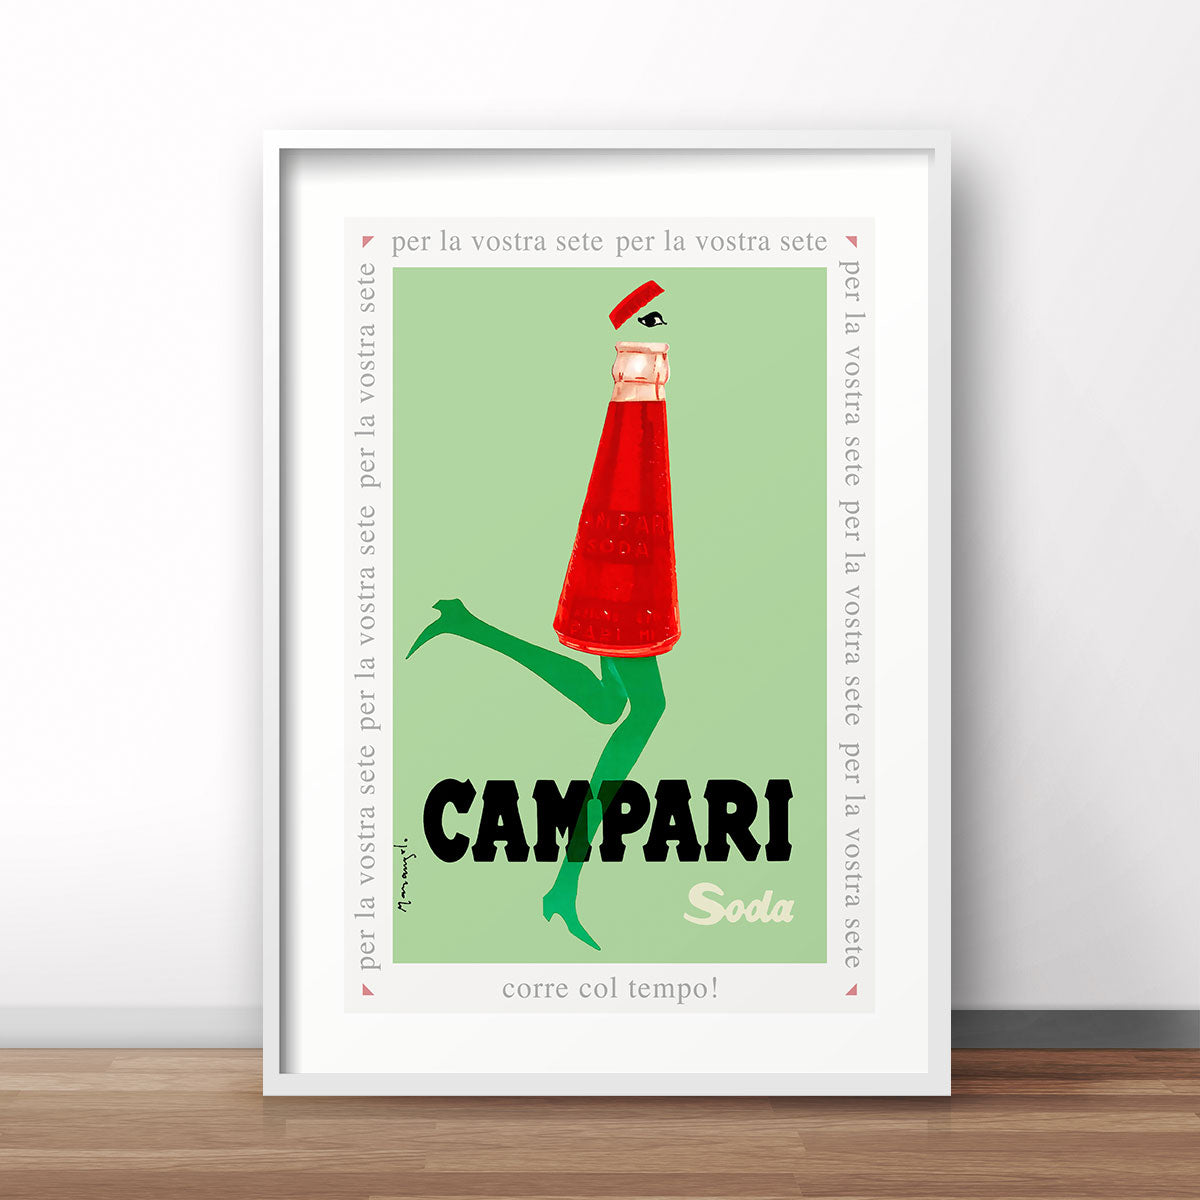 Campari Soda vintage retro advertising poster print from Places We Luv